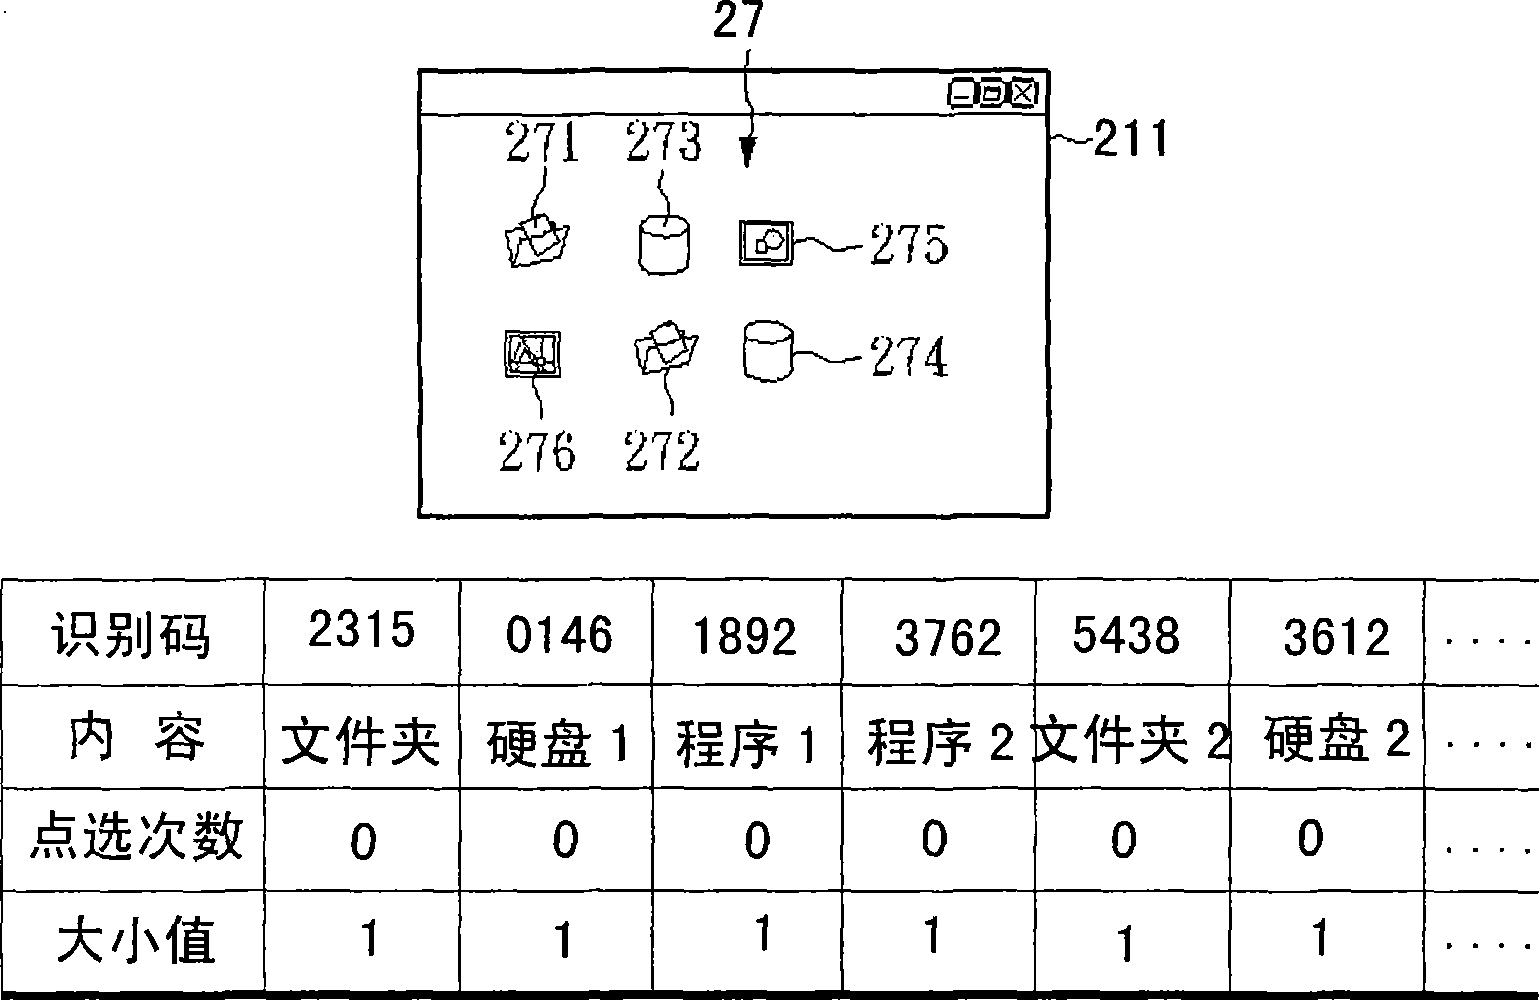 Method for auto-adjusting apparent size of display options in window picture according to using frequency